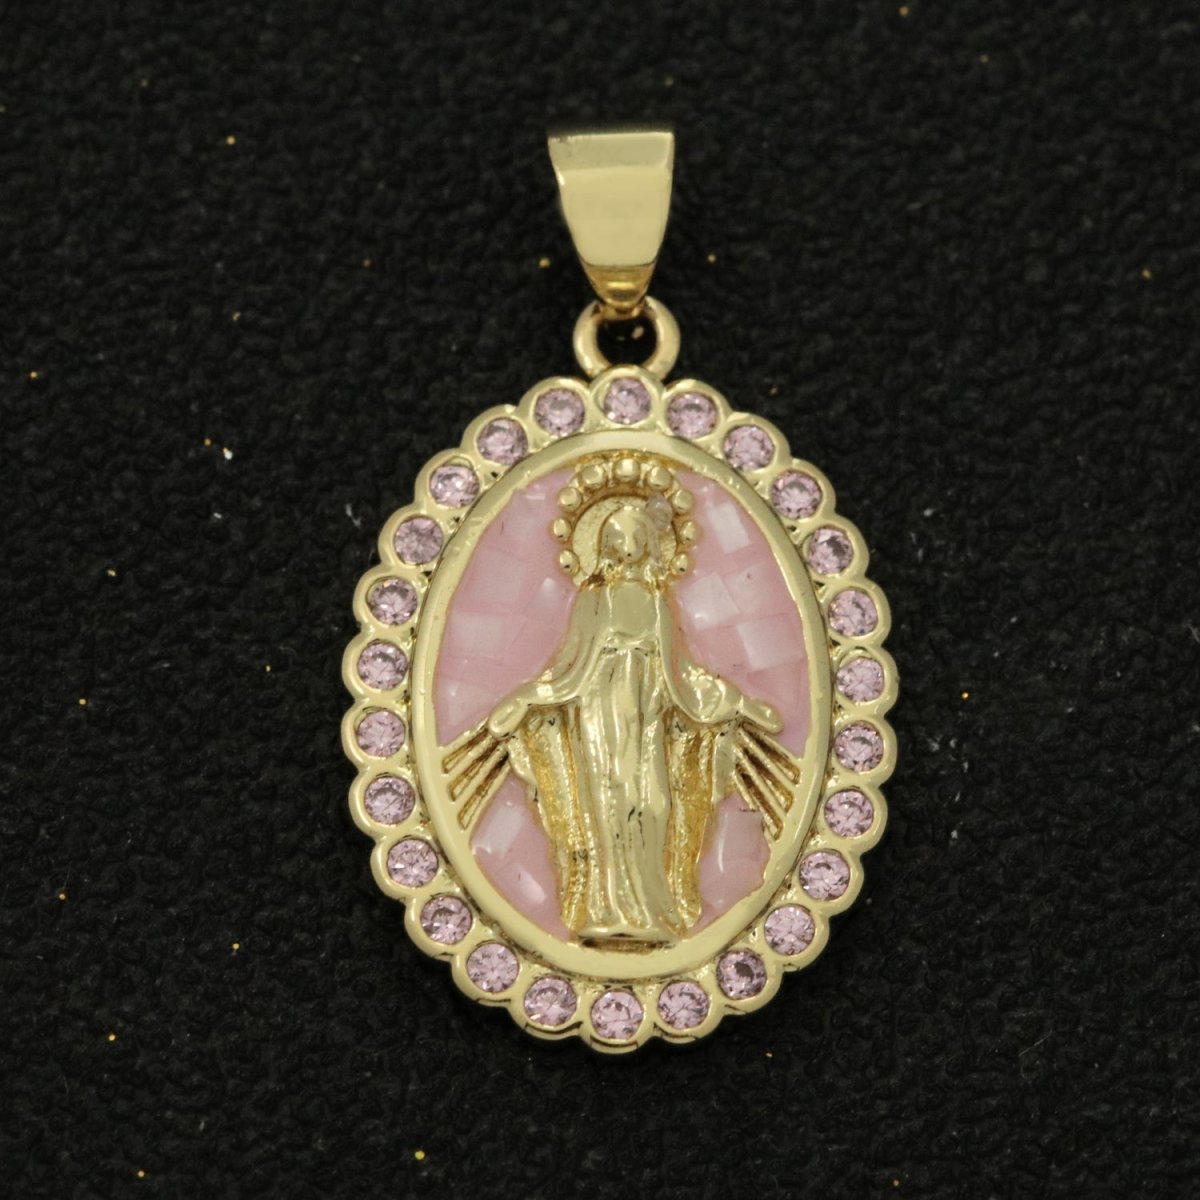 Pink miraculous Lady Charm for Necklace, Dainty Virgin Mary Pendant for Religious Jewelry Making Supply in Gold Filled N-1412 - DLUXCA